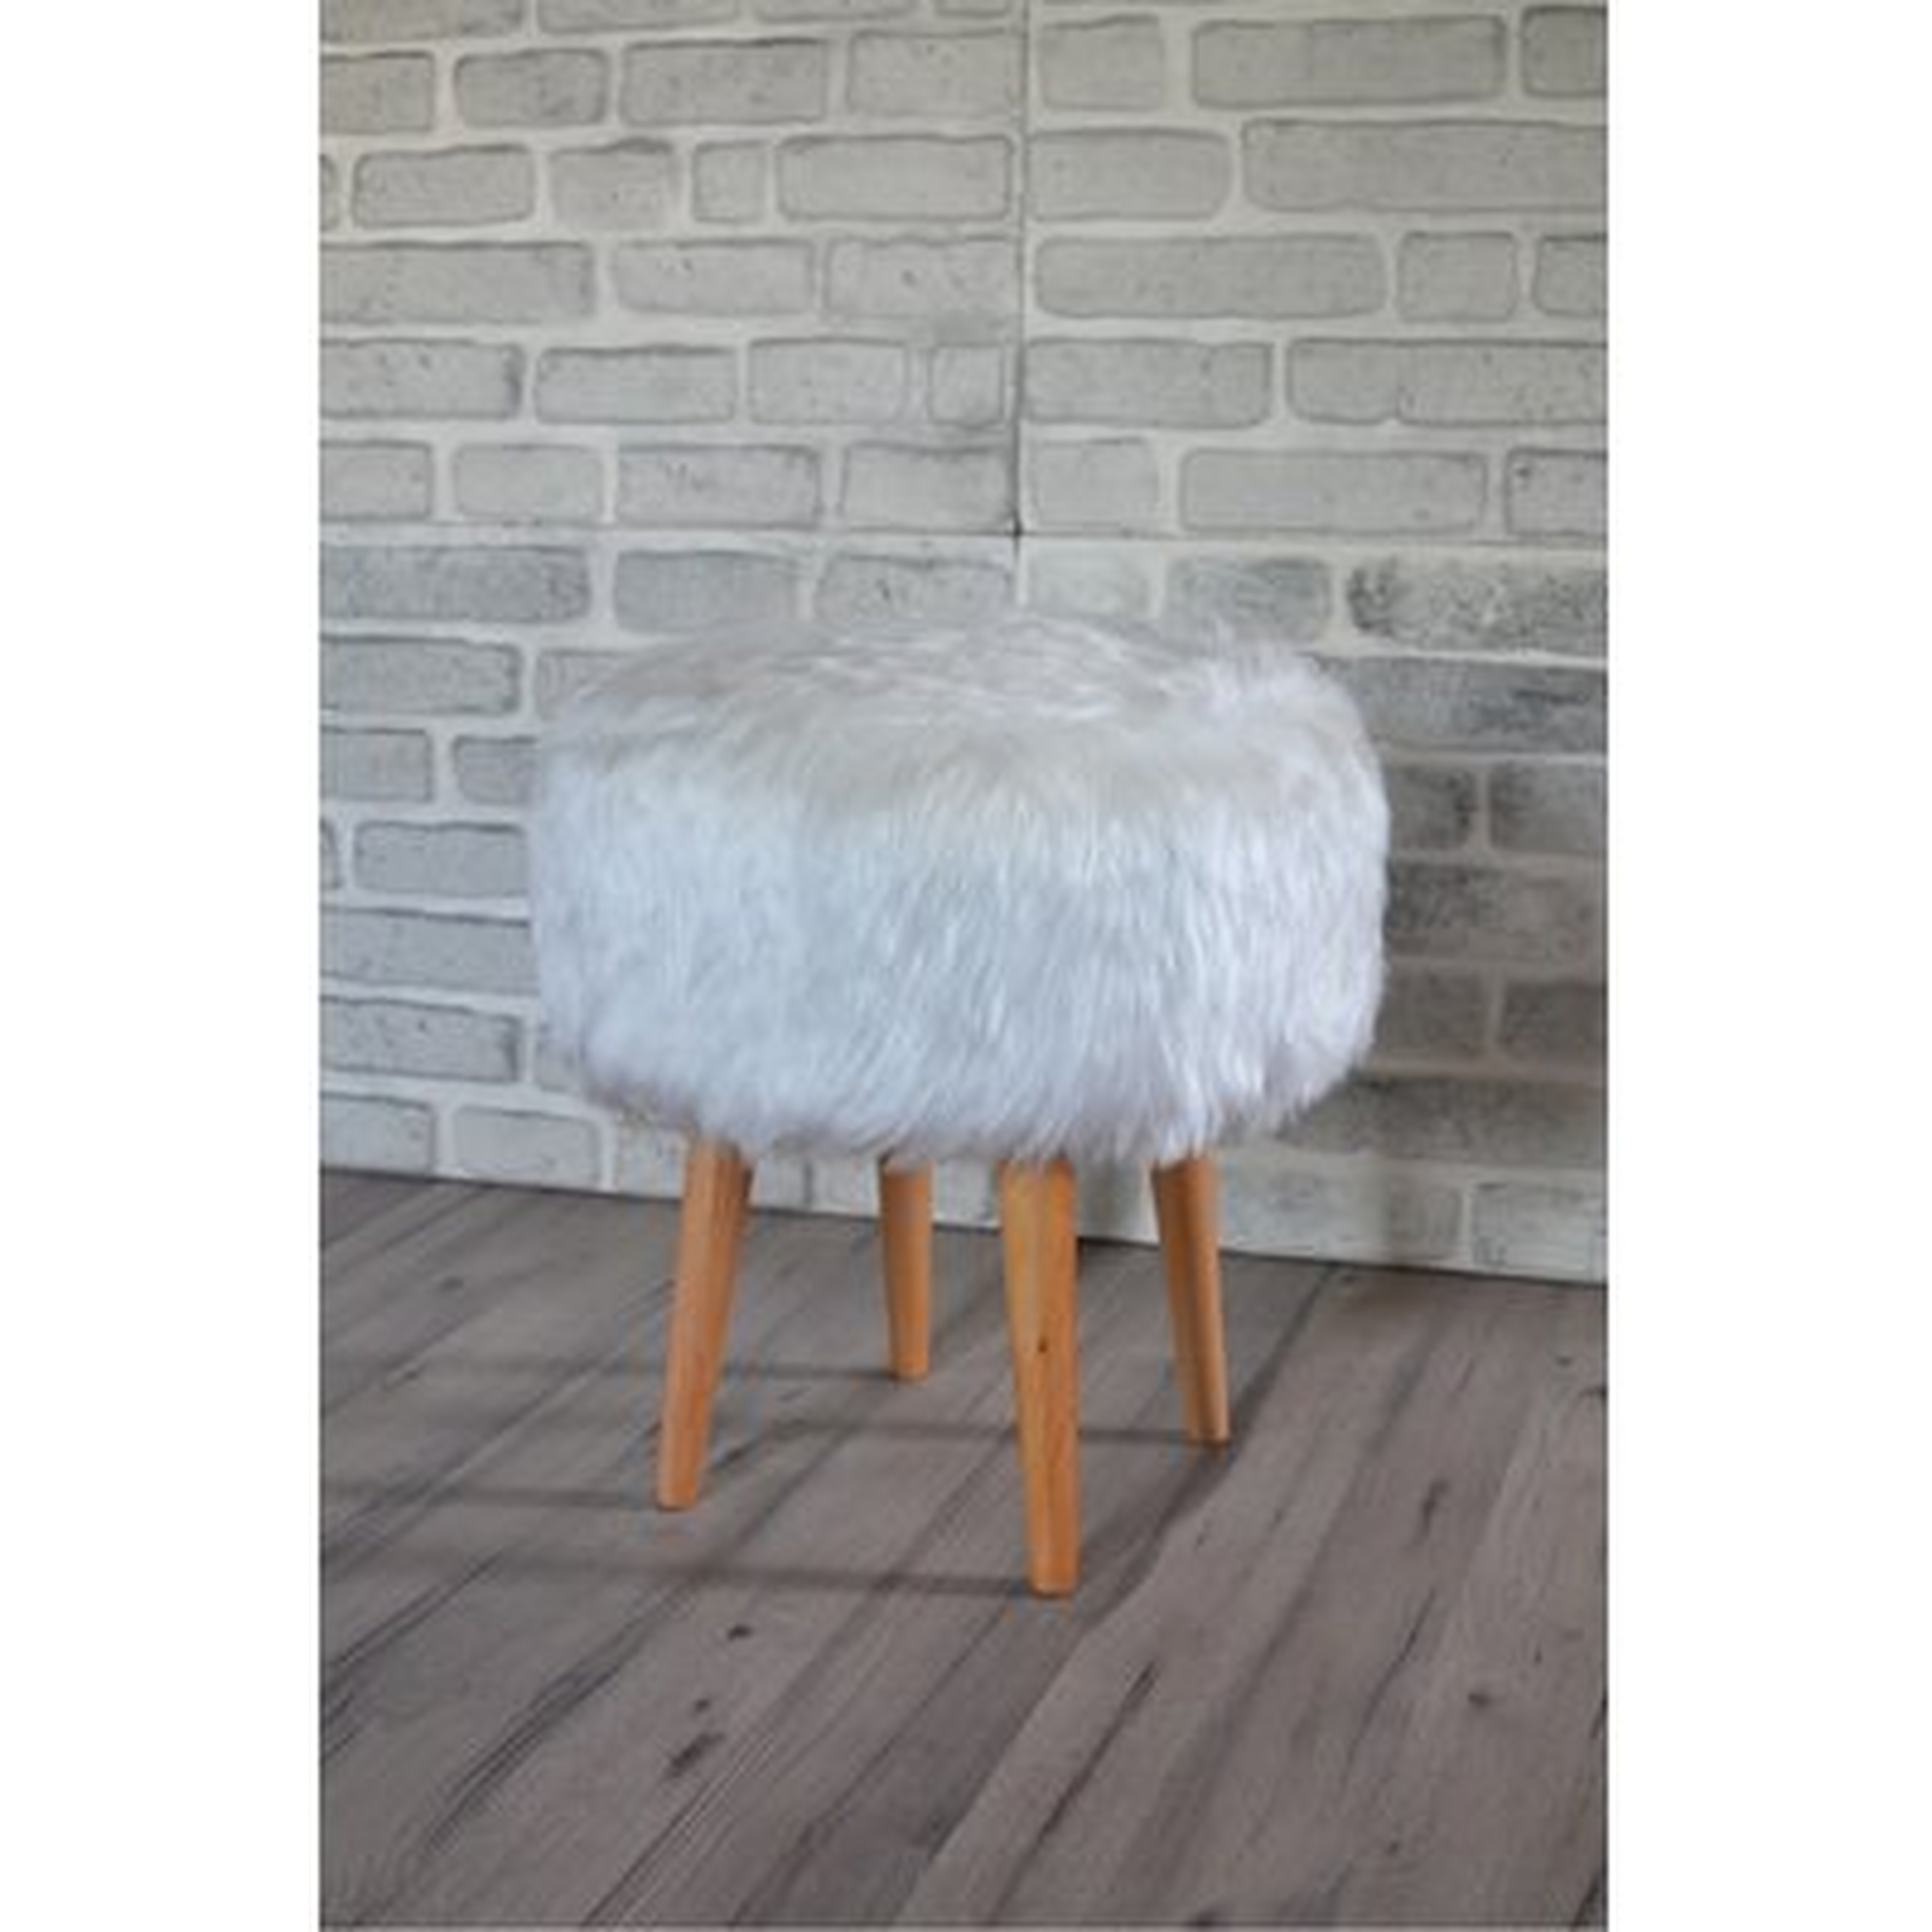 Pyramid Home Decor 17 Inch Round Faux Fur Ottoman - Fluffy Foot Stool With Fur Top And Wood Legs - Wayfair